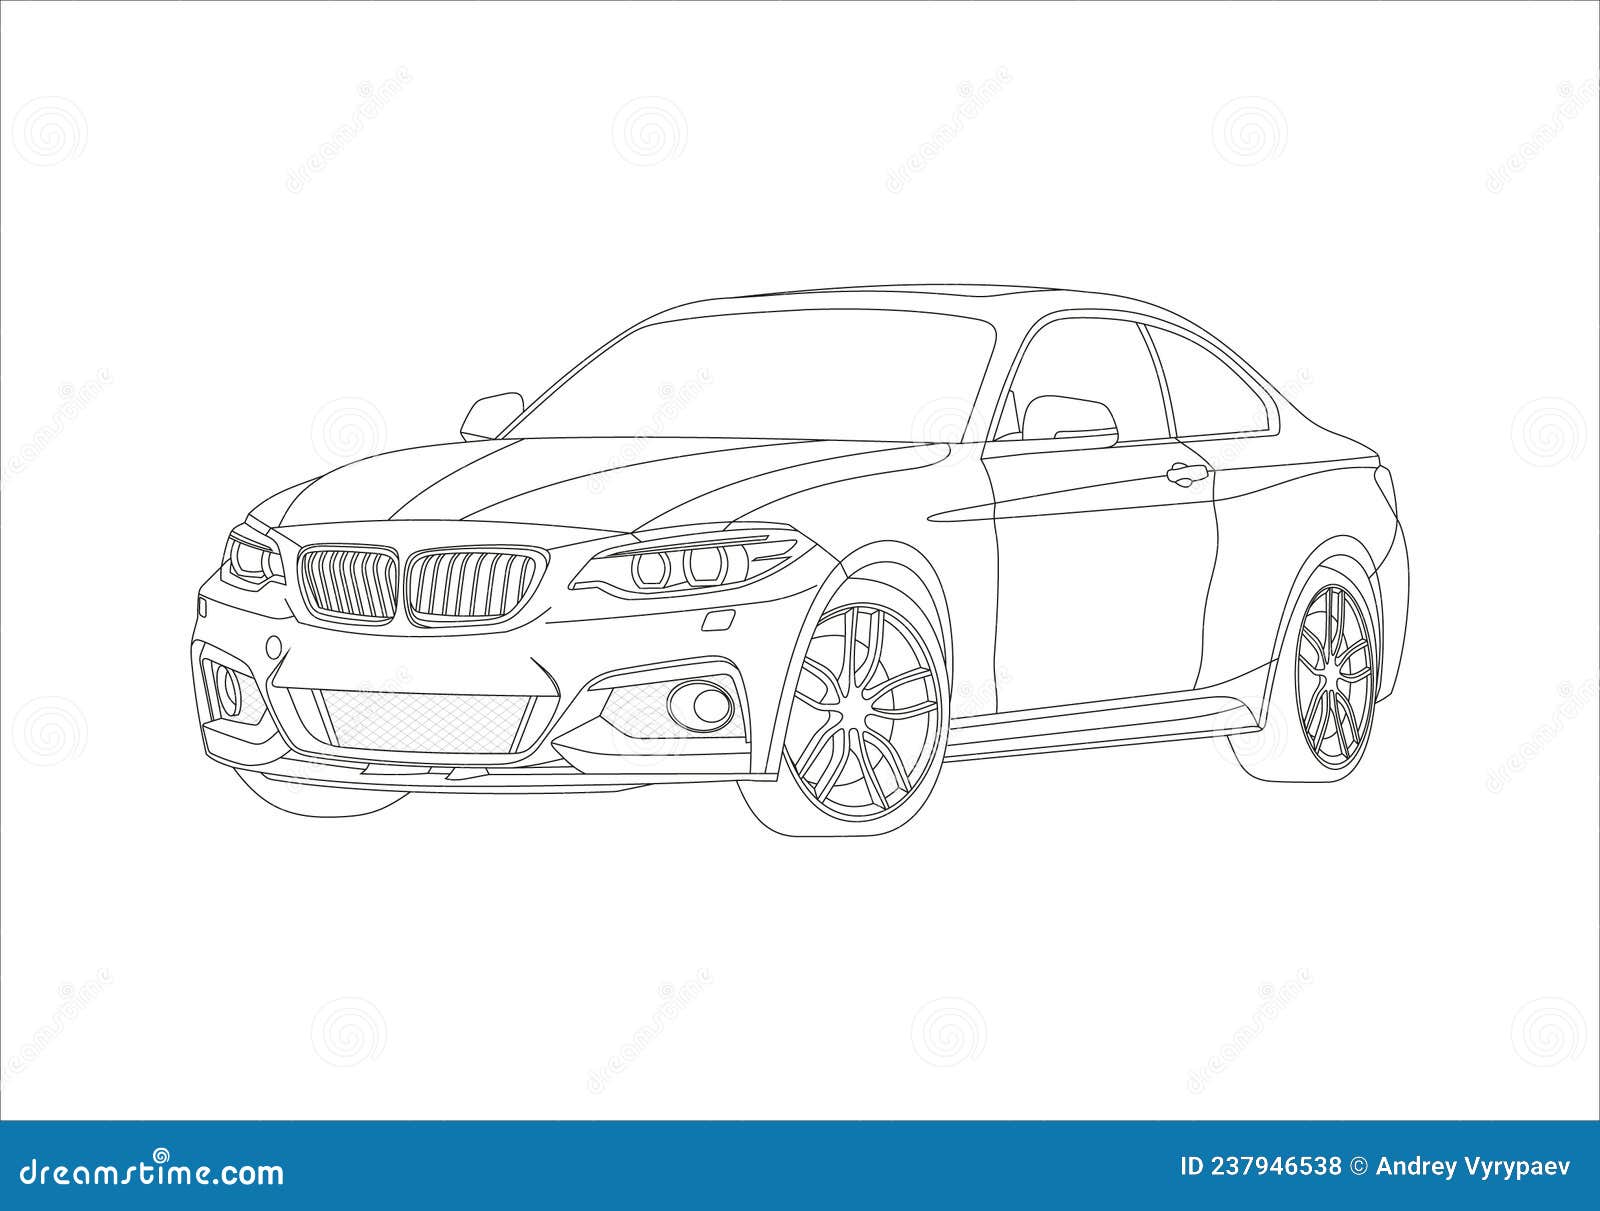 Share 135+ bmw car drawing best